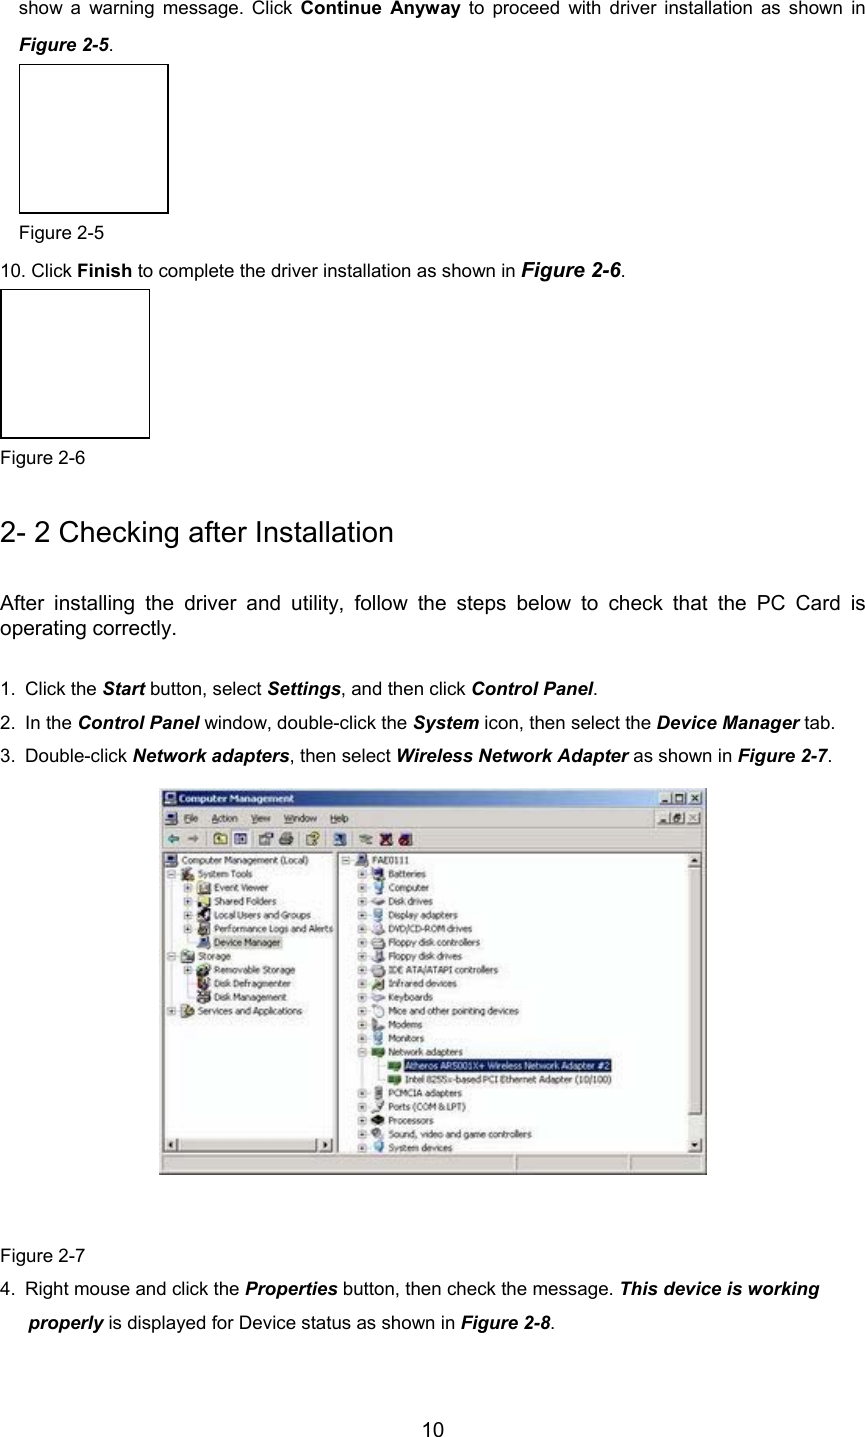        10 show a warning message. Click Continue Anyway to proceed with driver installation as shown inFigure 2-5.  Figure 2-5 10. Click Finish to complete the driver installation as shown in Figure 2-6.  Figure 2-6 2- 2 Checking after Installation After installing the driver and utility, follow the steps below to check that the PC Card isoperating correctly. 1. Click the Start button, select Settings, and then click Control Panel.2. In the Control Panel window, double-click the System icon, then select the Device Manager tab.3. Double-click Network adapters, then select Wireless Network Adapter as shown in Figure 2-7.               Figure 2-74.  Right mouse and click the Properties button, then check the message. This device is working properly is displayed for Device status as shown in Figure 2-8.